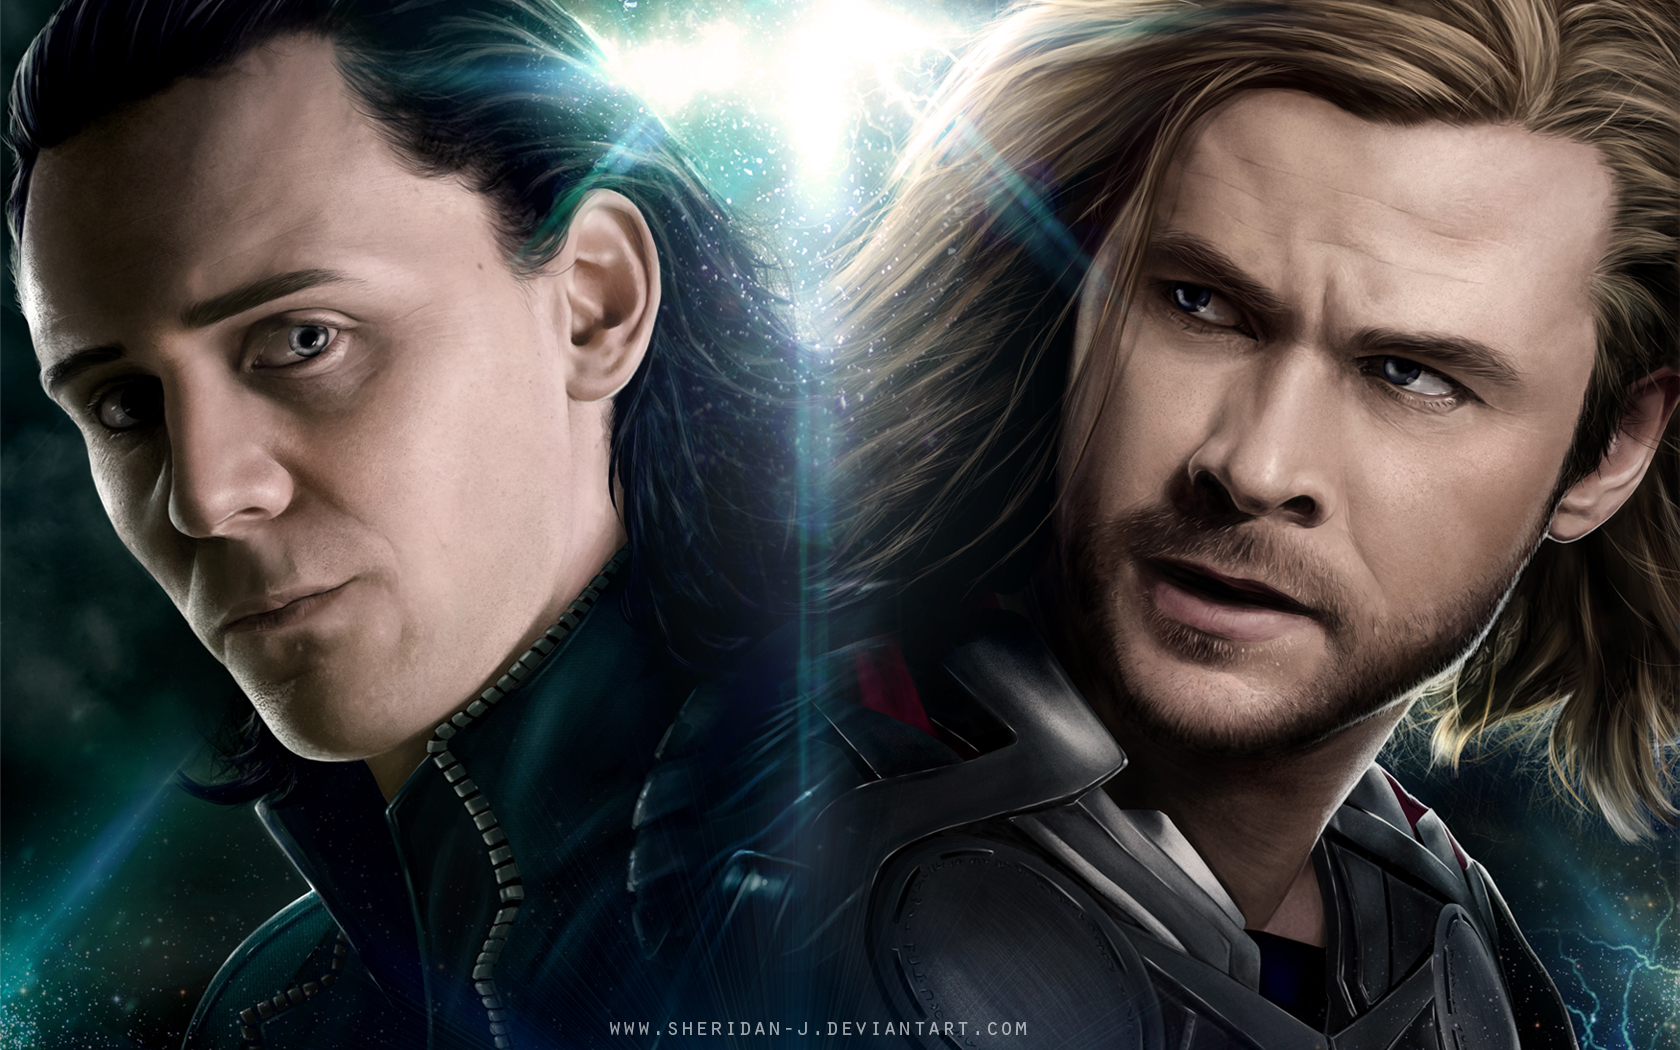 Check this out our new Loki wallpaper Loki wallpapers 1680x1050